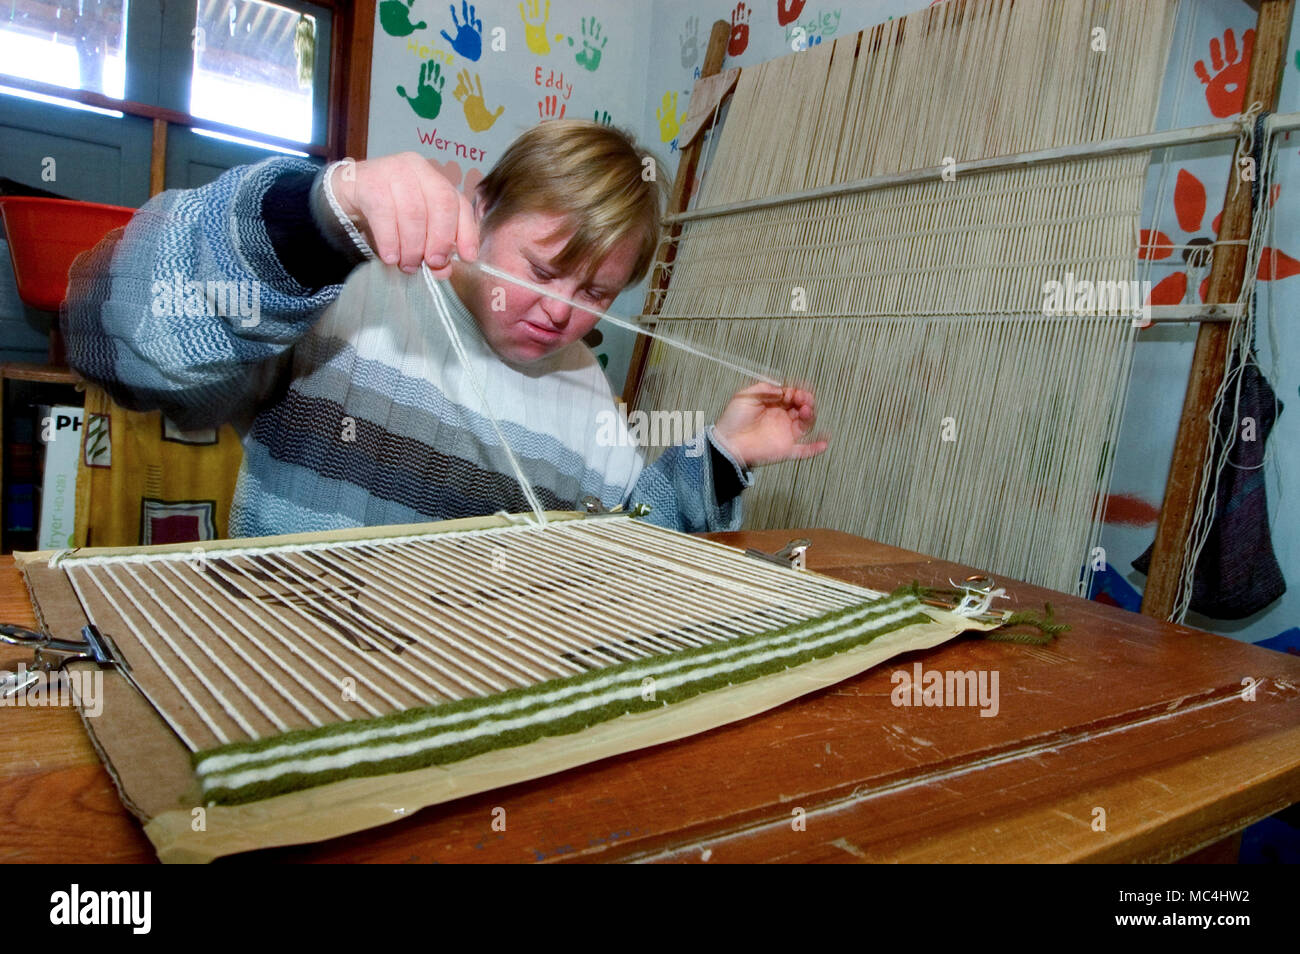 Within the education and welfare system of the Mennonite world there is also an efficient laboratory for handycappati, the problem of Down syndrome is Stock Photo